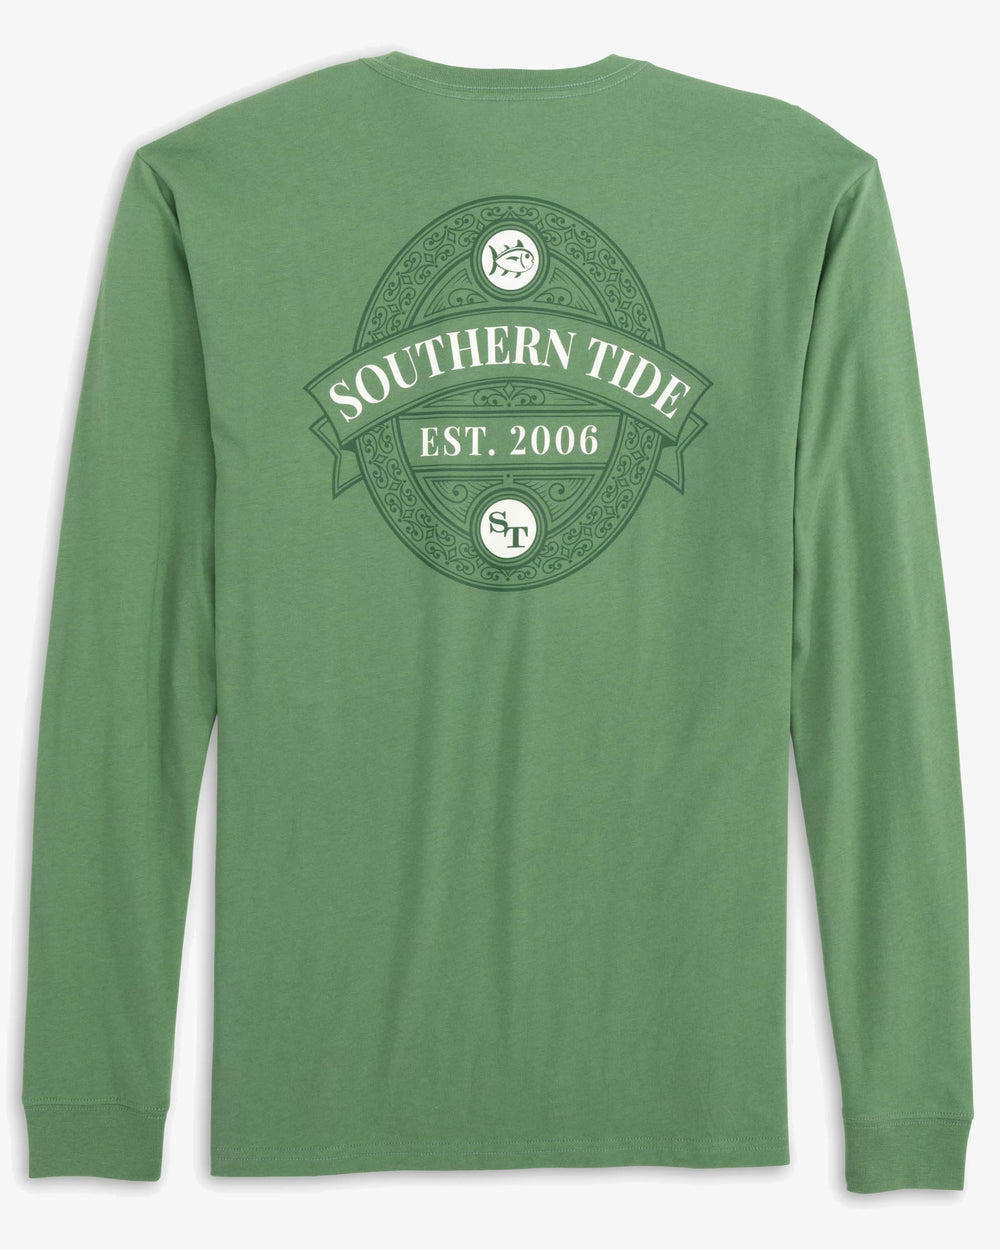 The back view of the Iron Wrought Oval Long Sleeve T-Shirt by Southern Tide - Basil Pesto